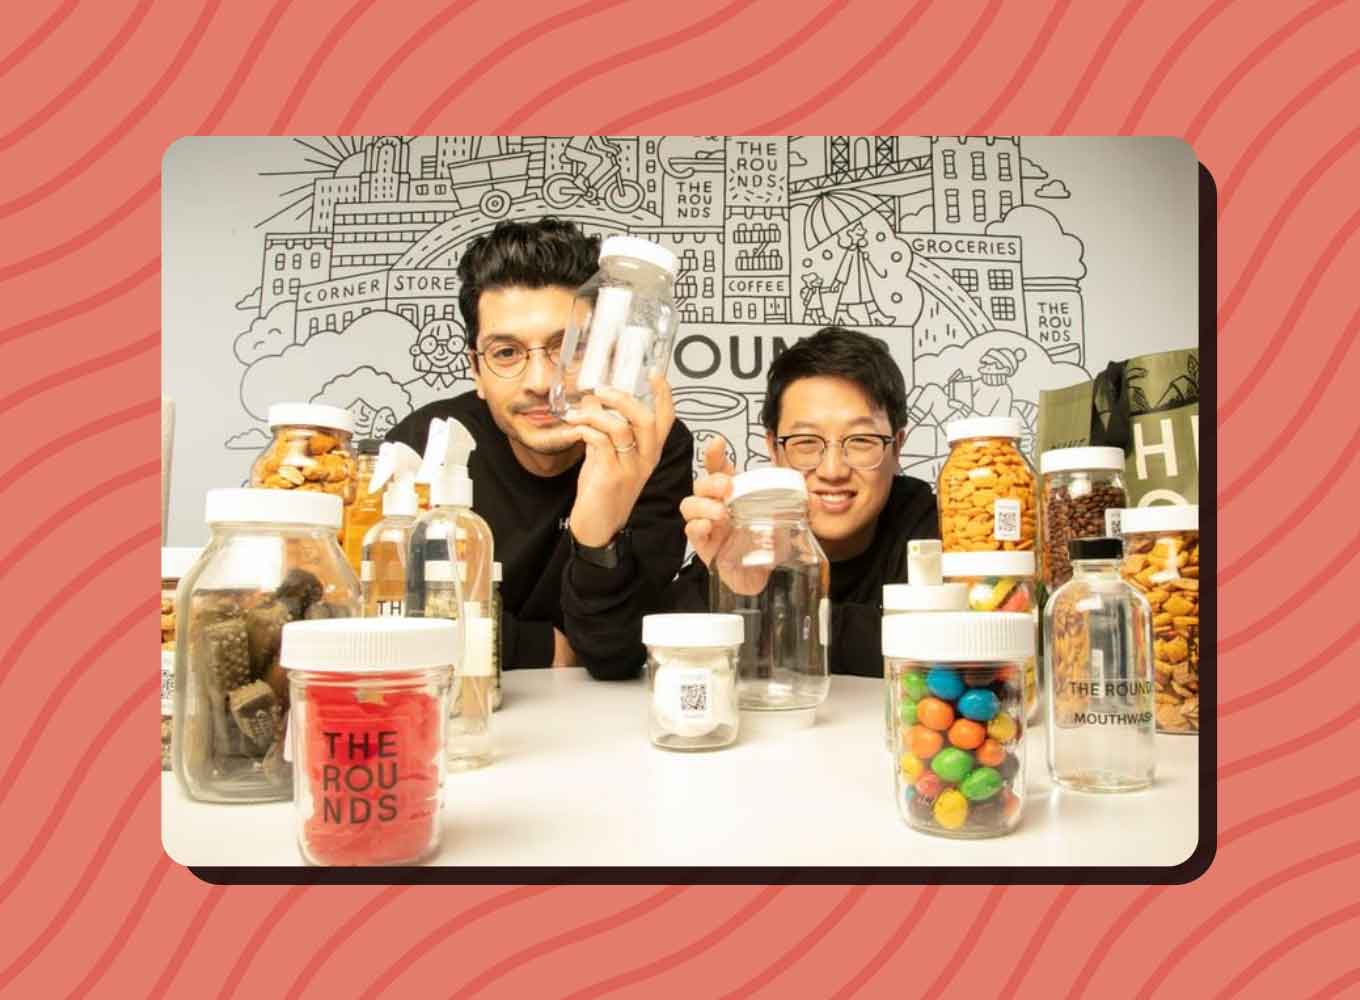 Alex Torrey and Byungwoo Ko smile behind a variety of jars containing different snack foods